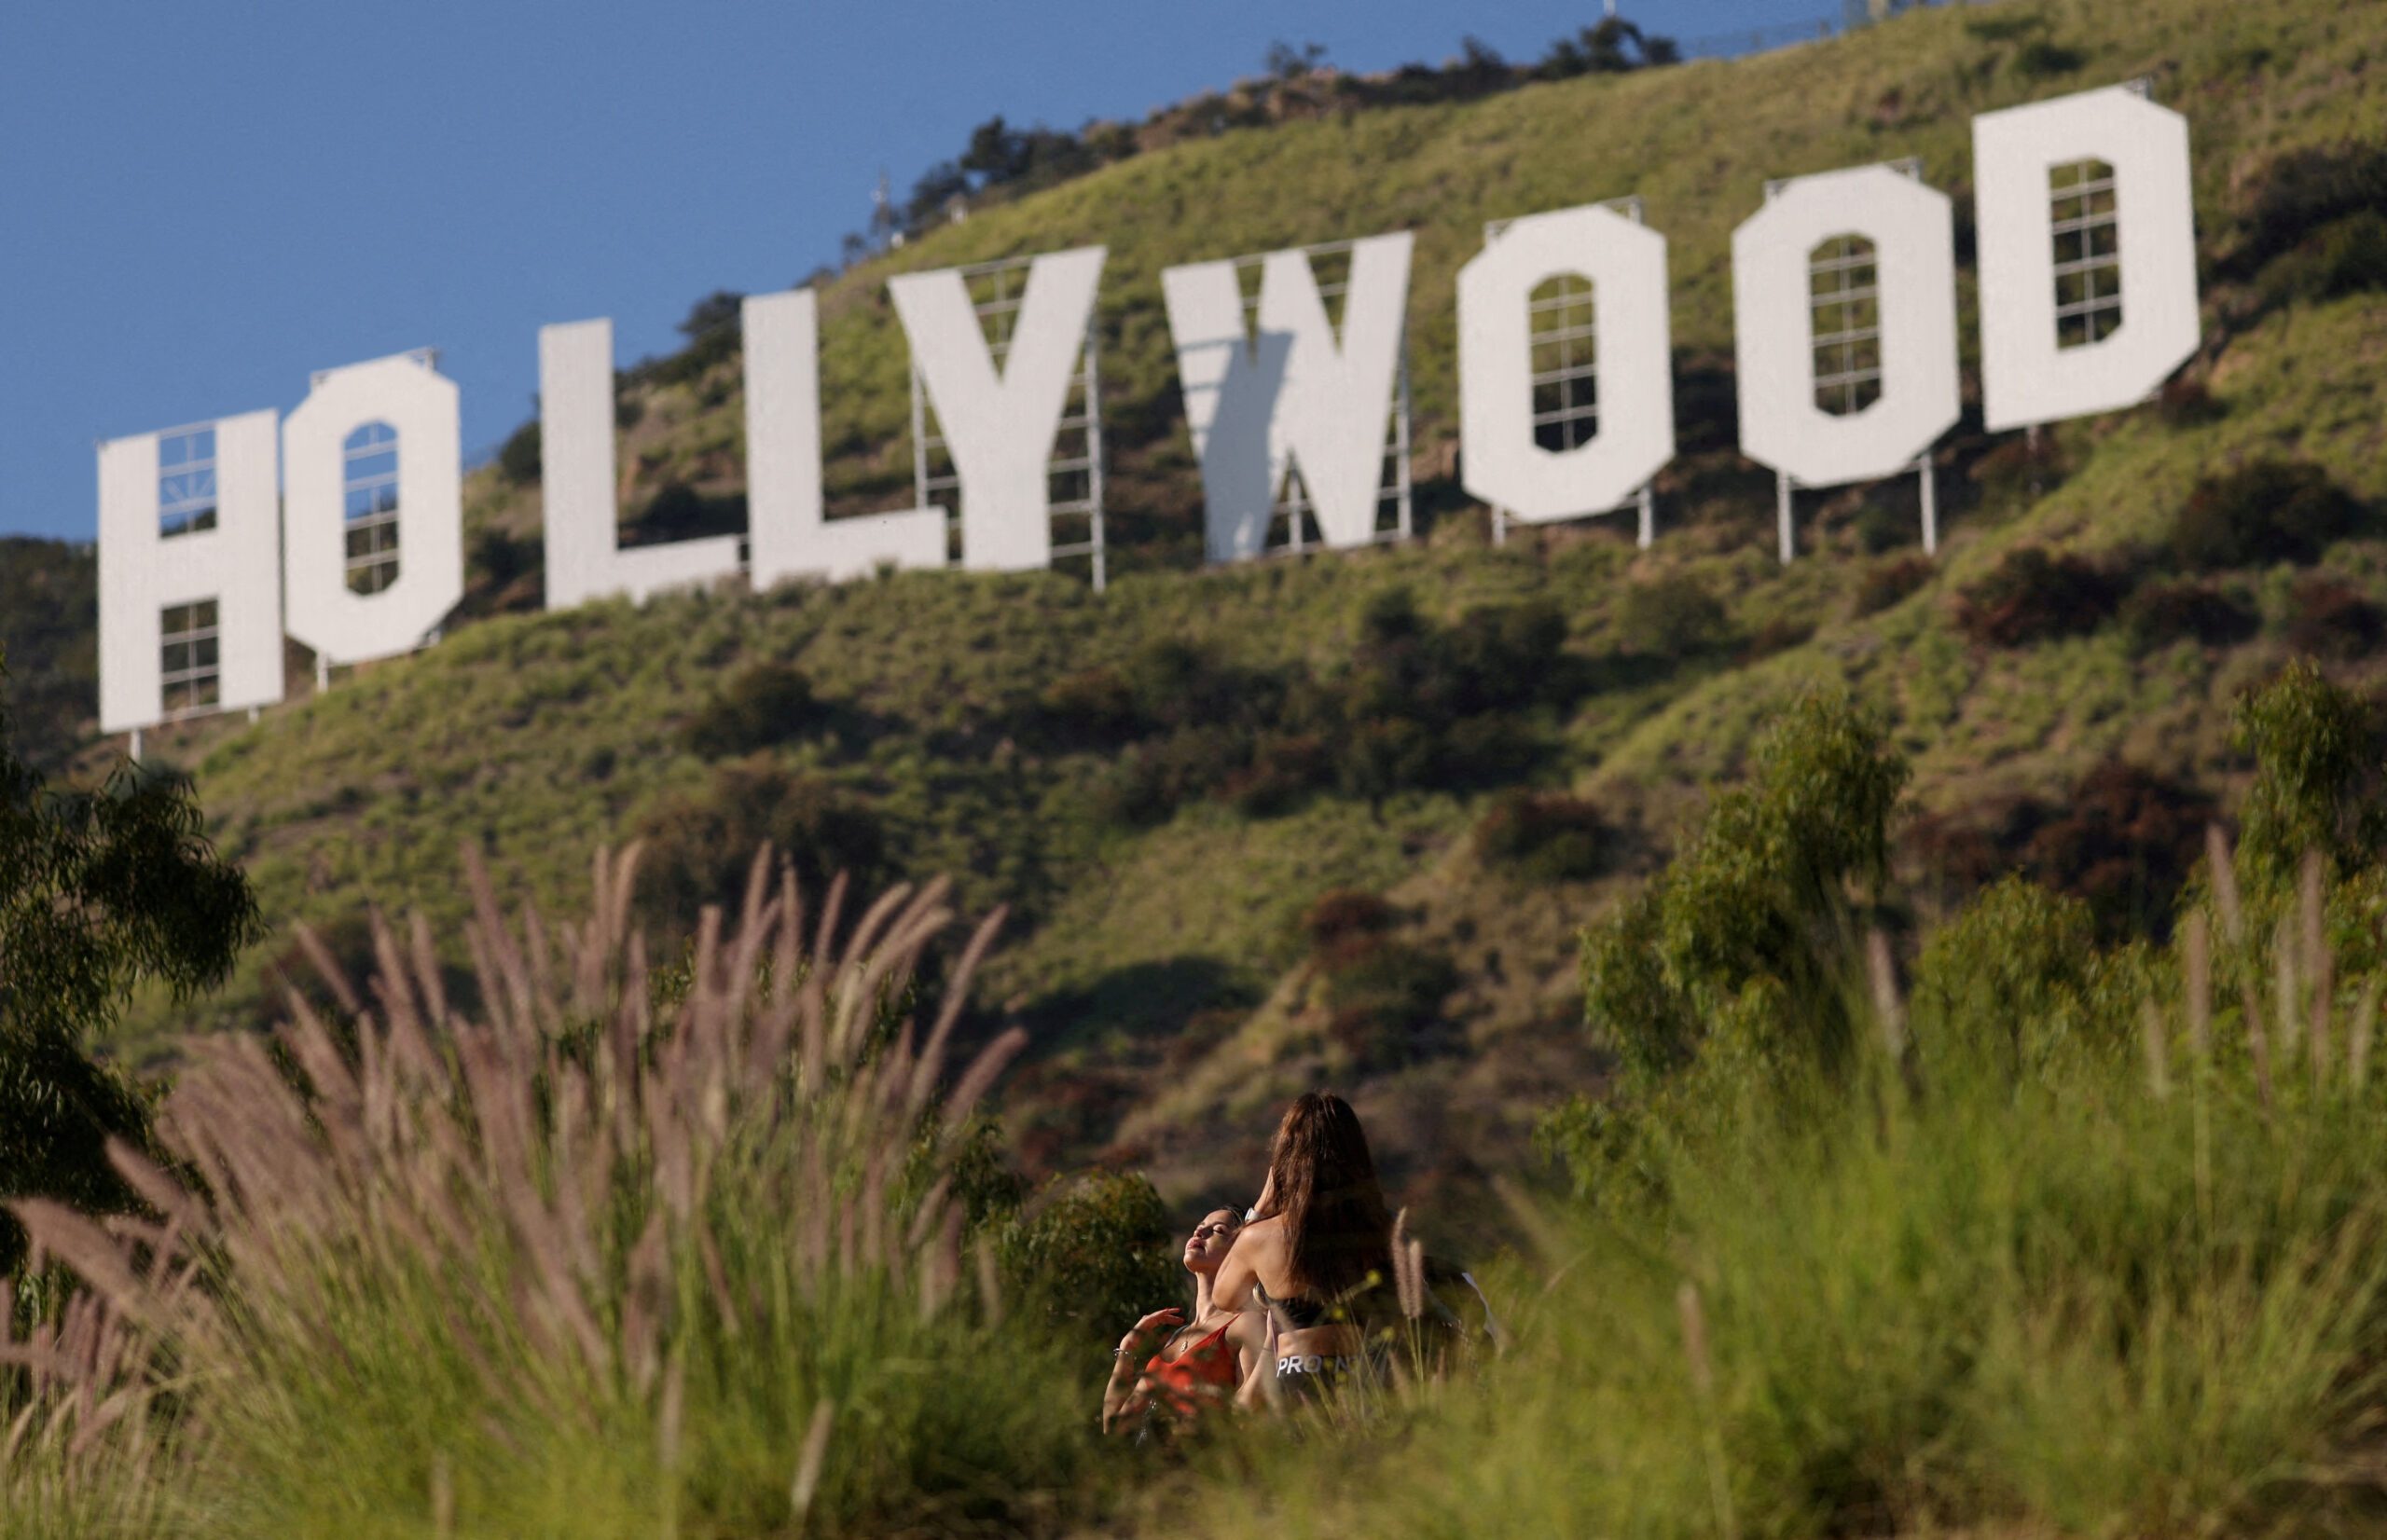 Actors ratify three-year contract, ending Hollywood’s labor turmoil